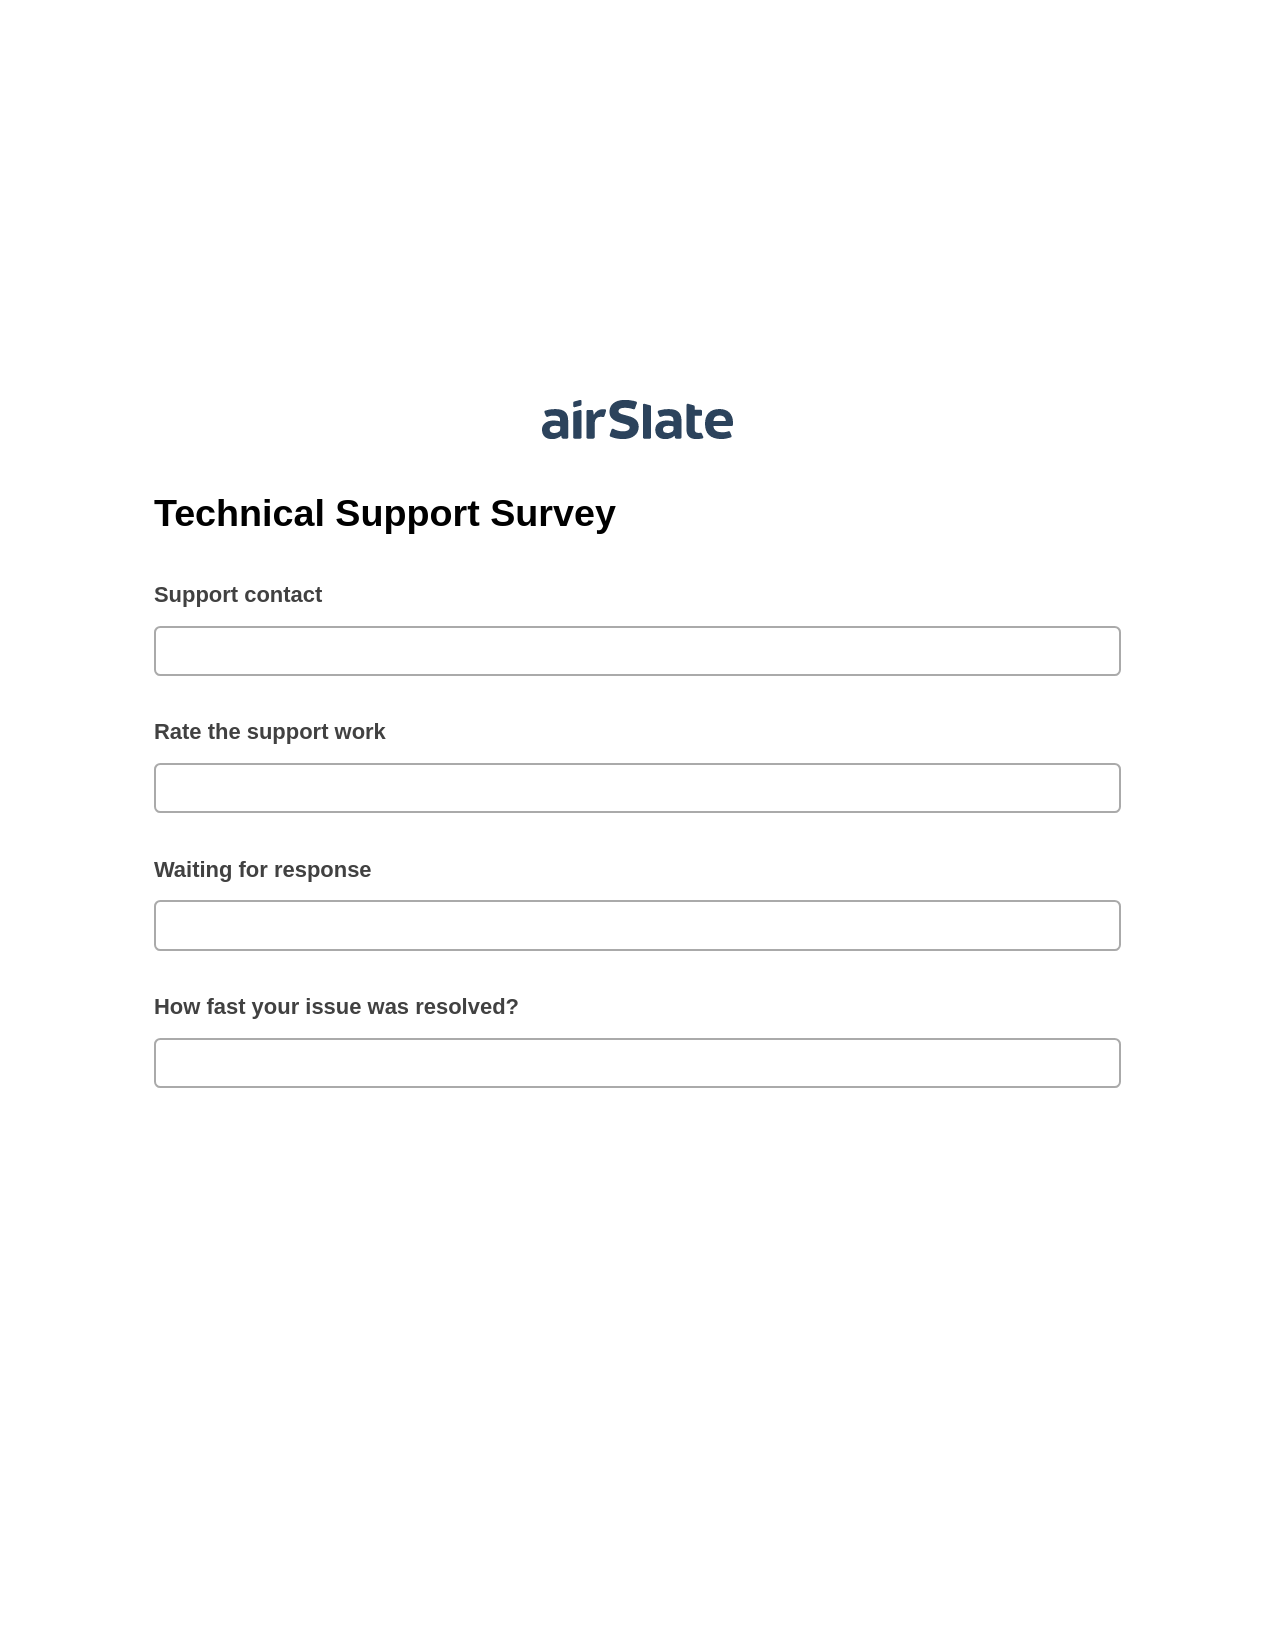 Technical Support Survey Pre-fill Document Bot, Create Salesforce Records Bot, Archive to SharePoint Folder Bot